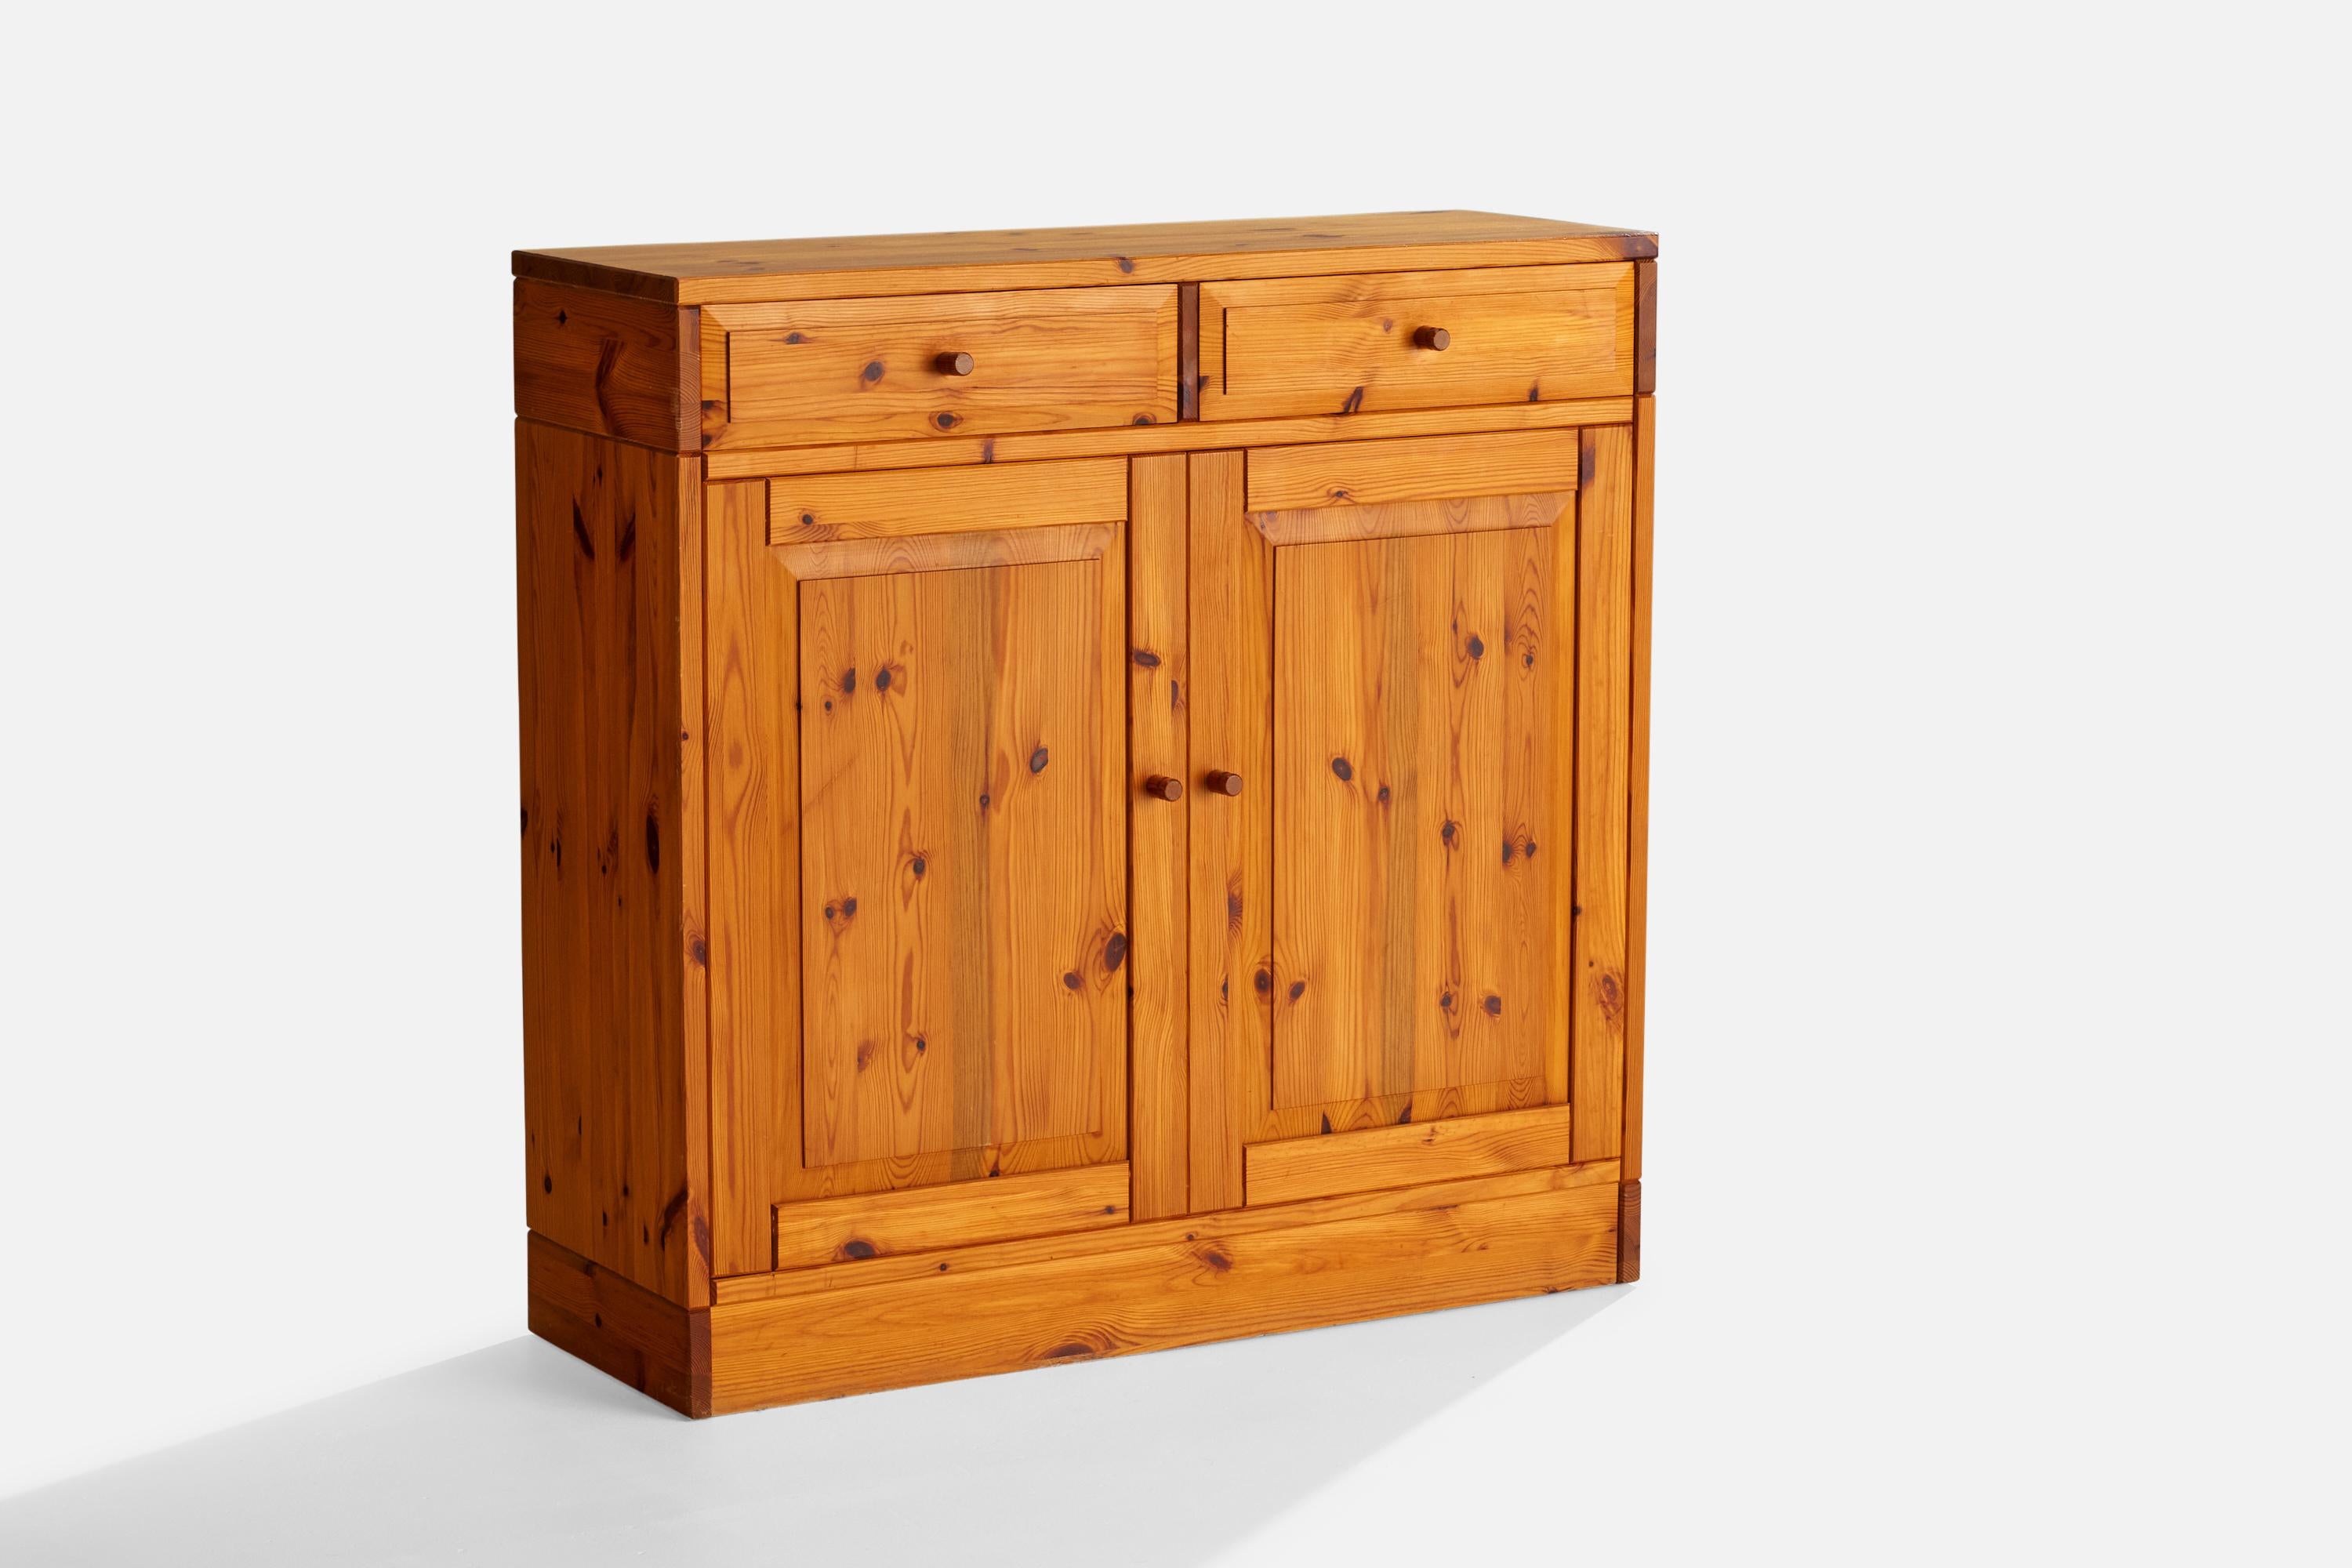 A pine cabinet designed and produced in Sweden, c. 1970s.